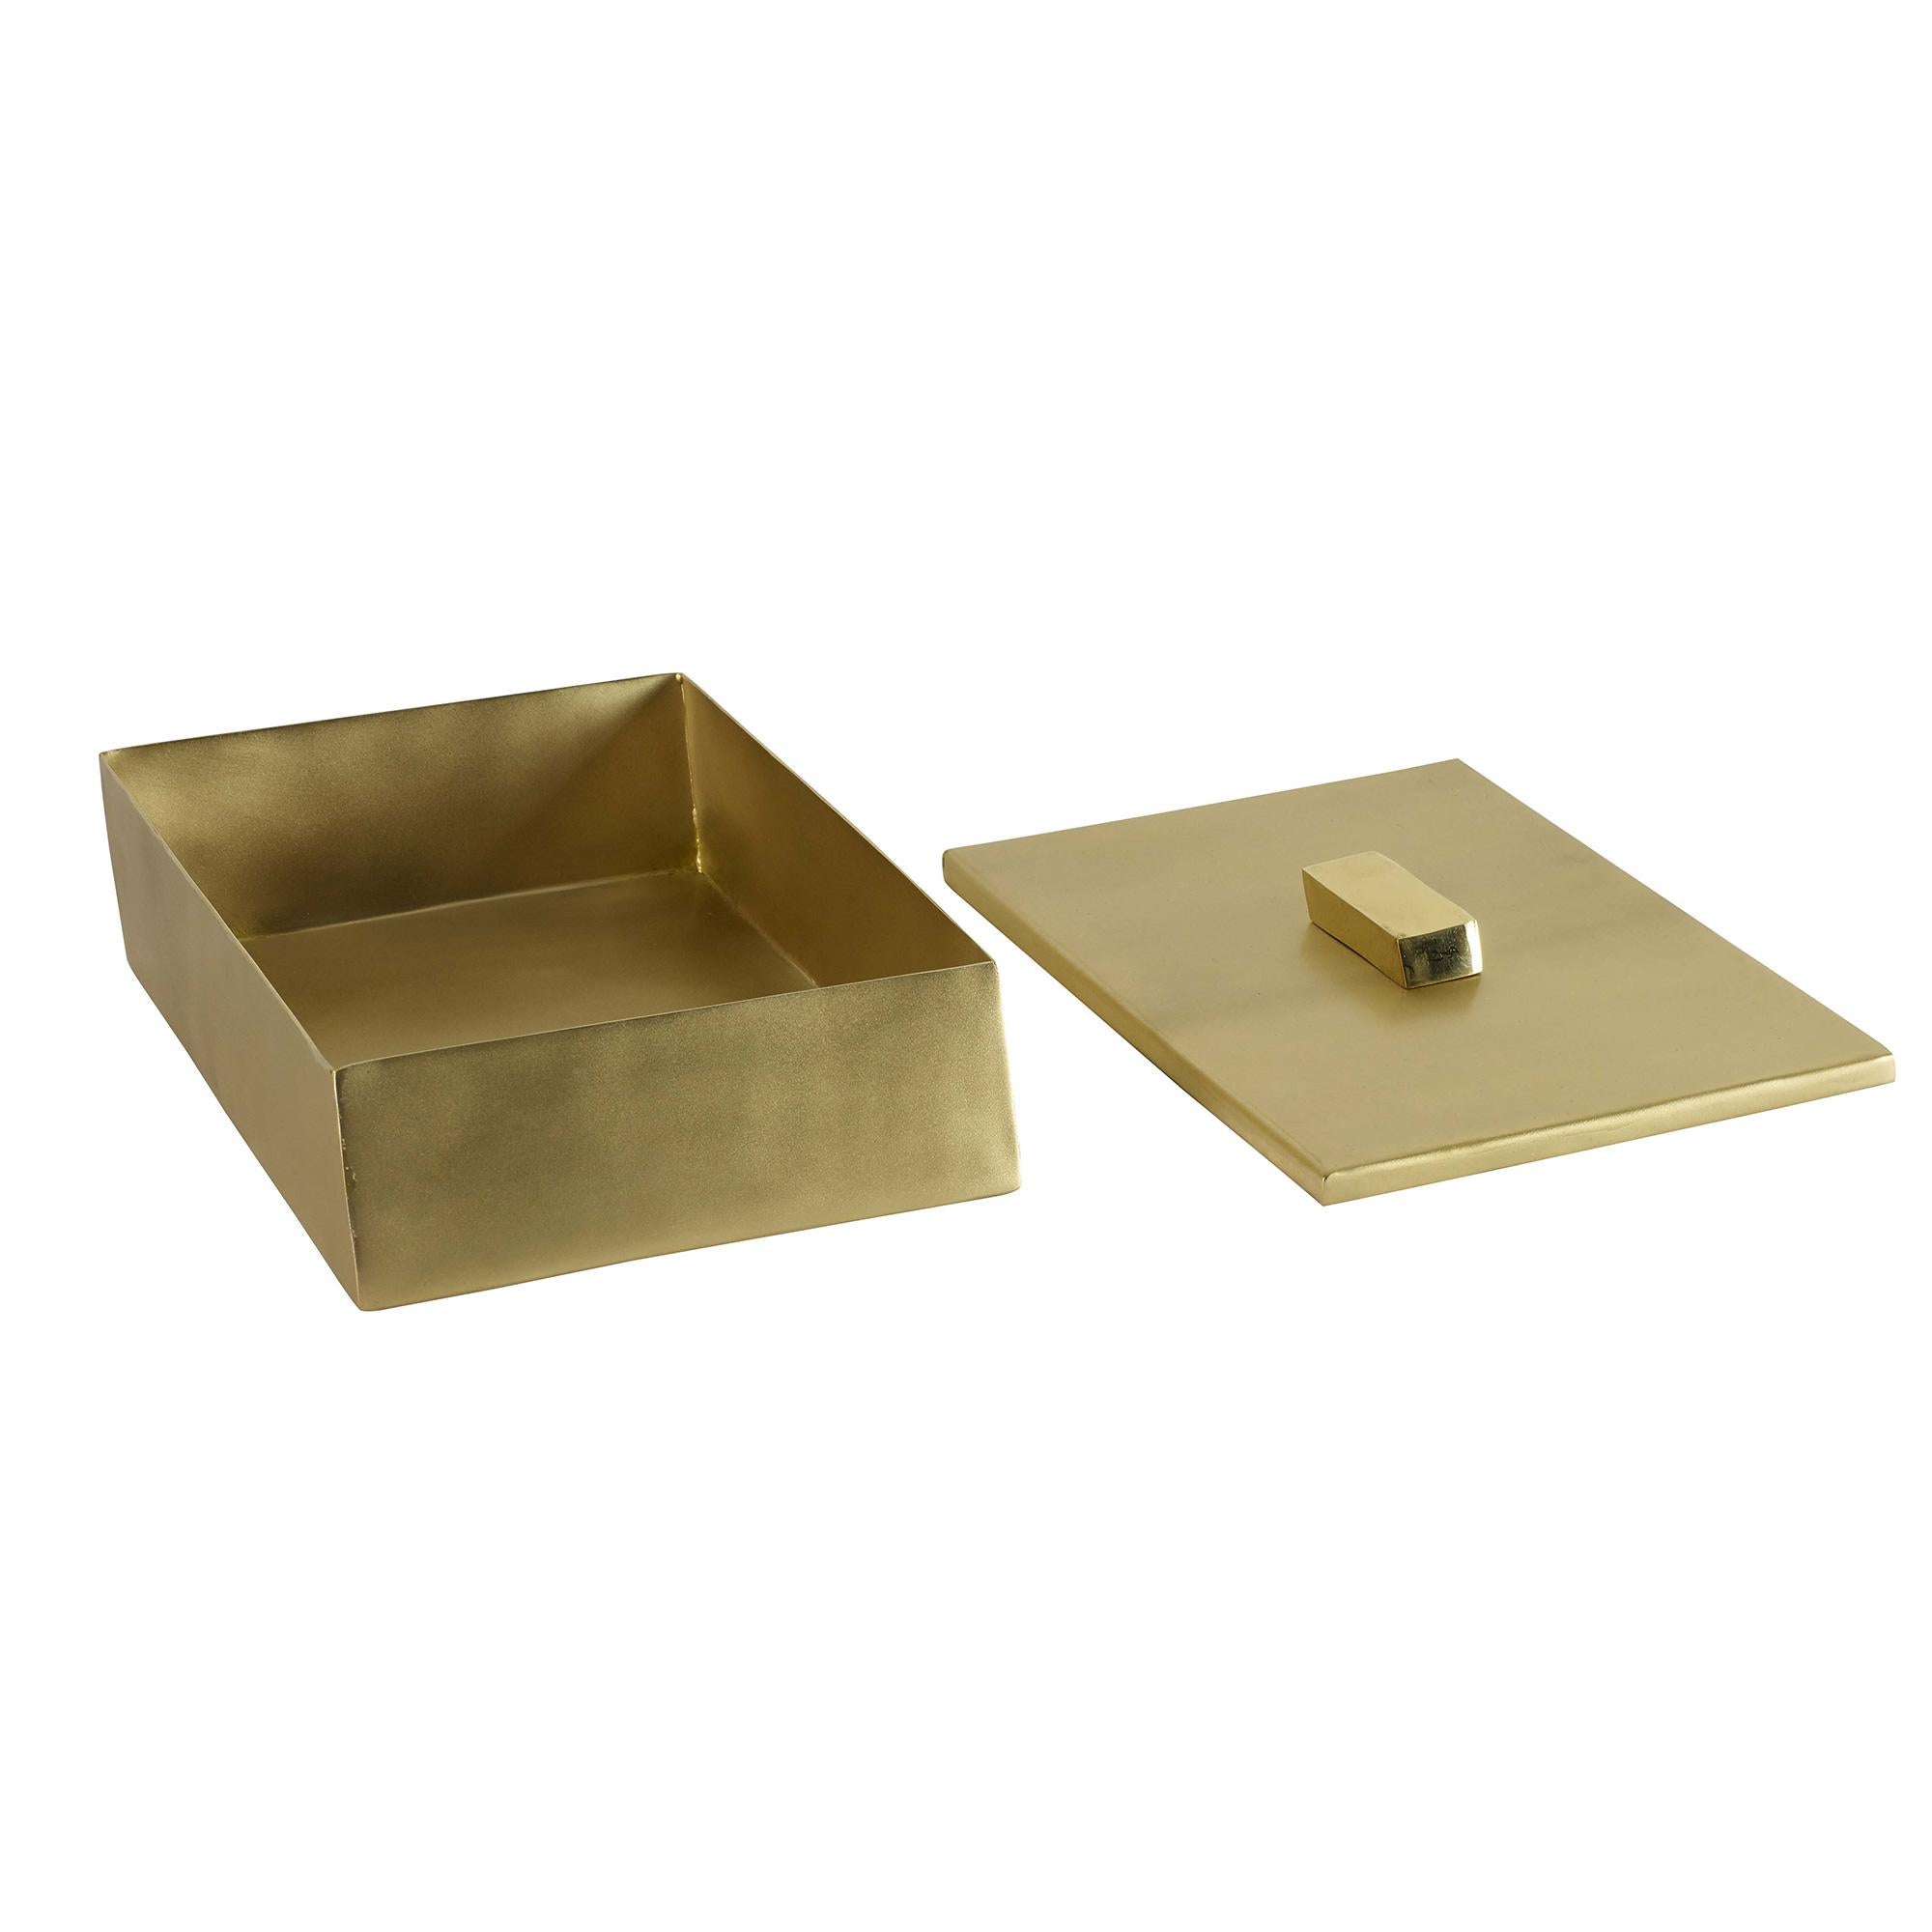 A handmade angled brass box featuring a matte finish and a contrasting shiny nob.
 